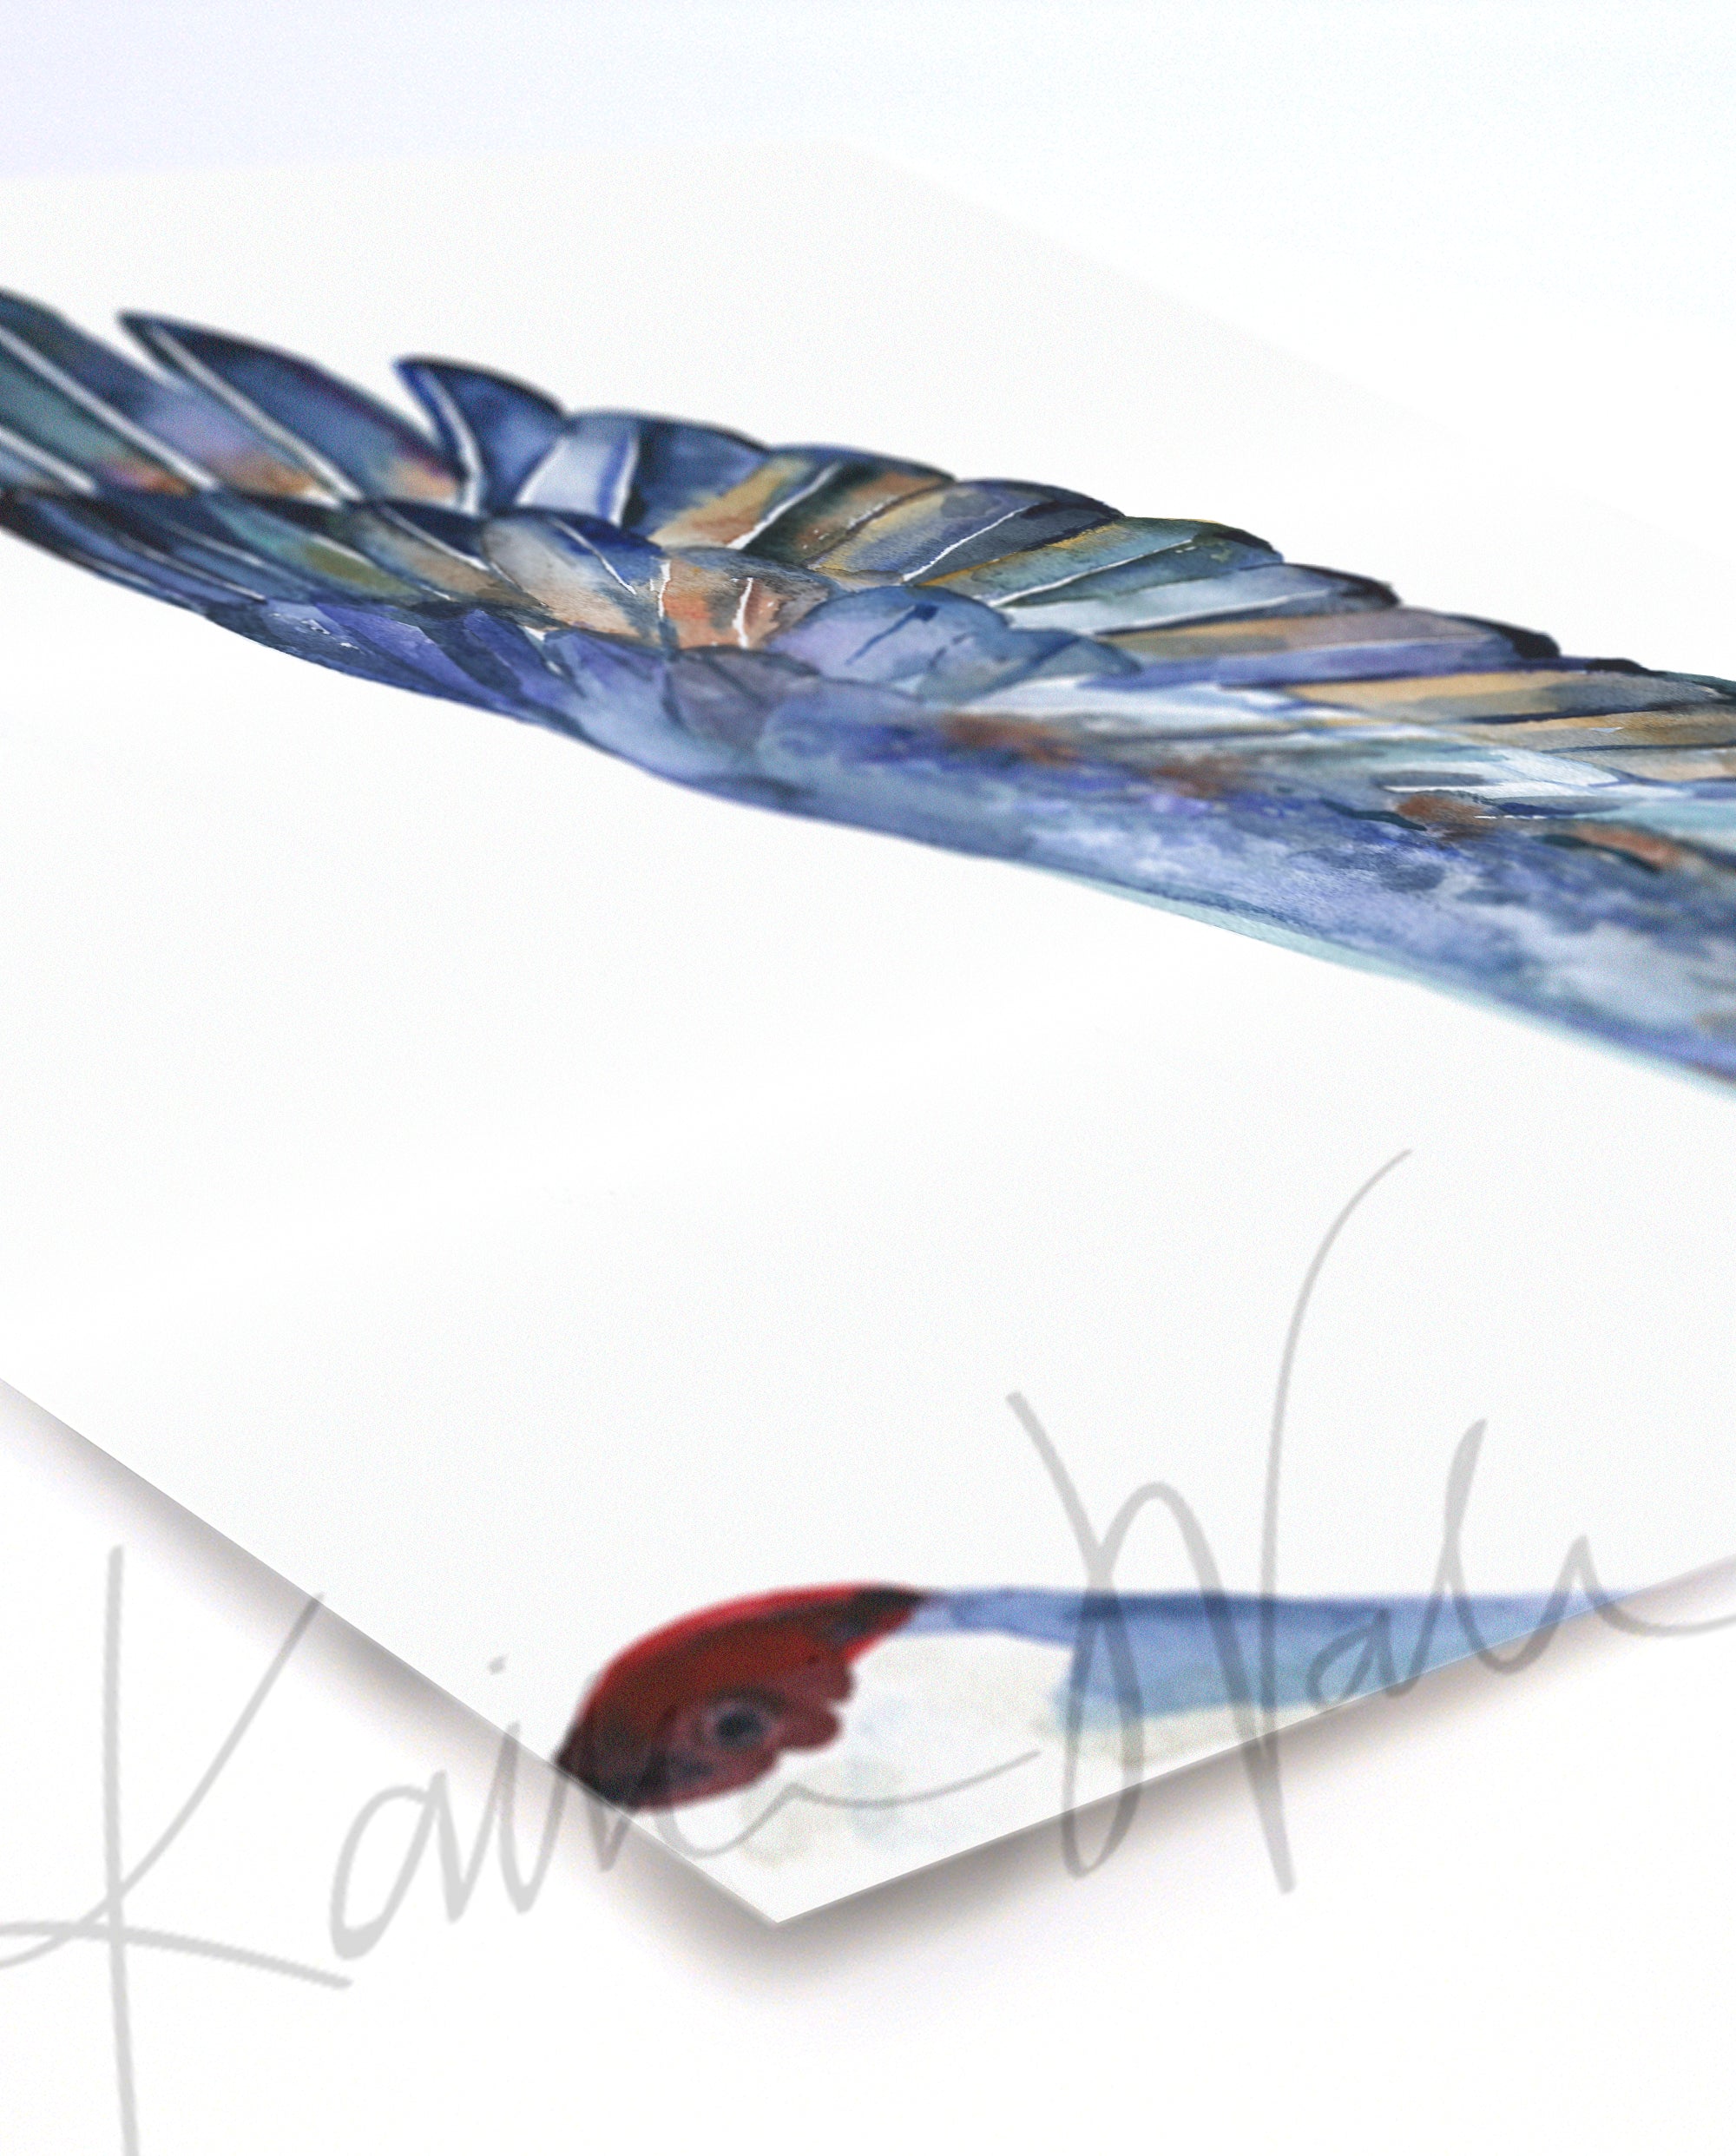 Unframed watercolor of a crane's wings with dark blue and brown feathers. The print is at an angle.